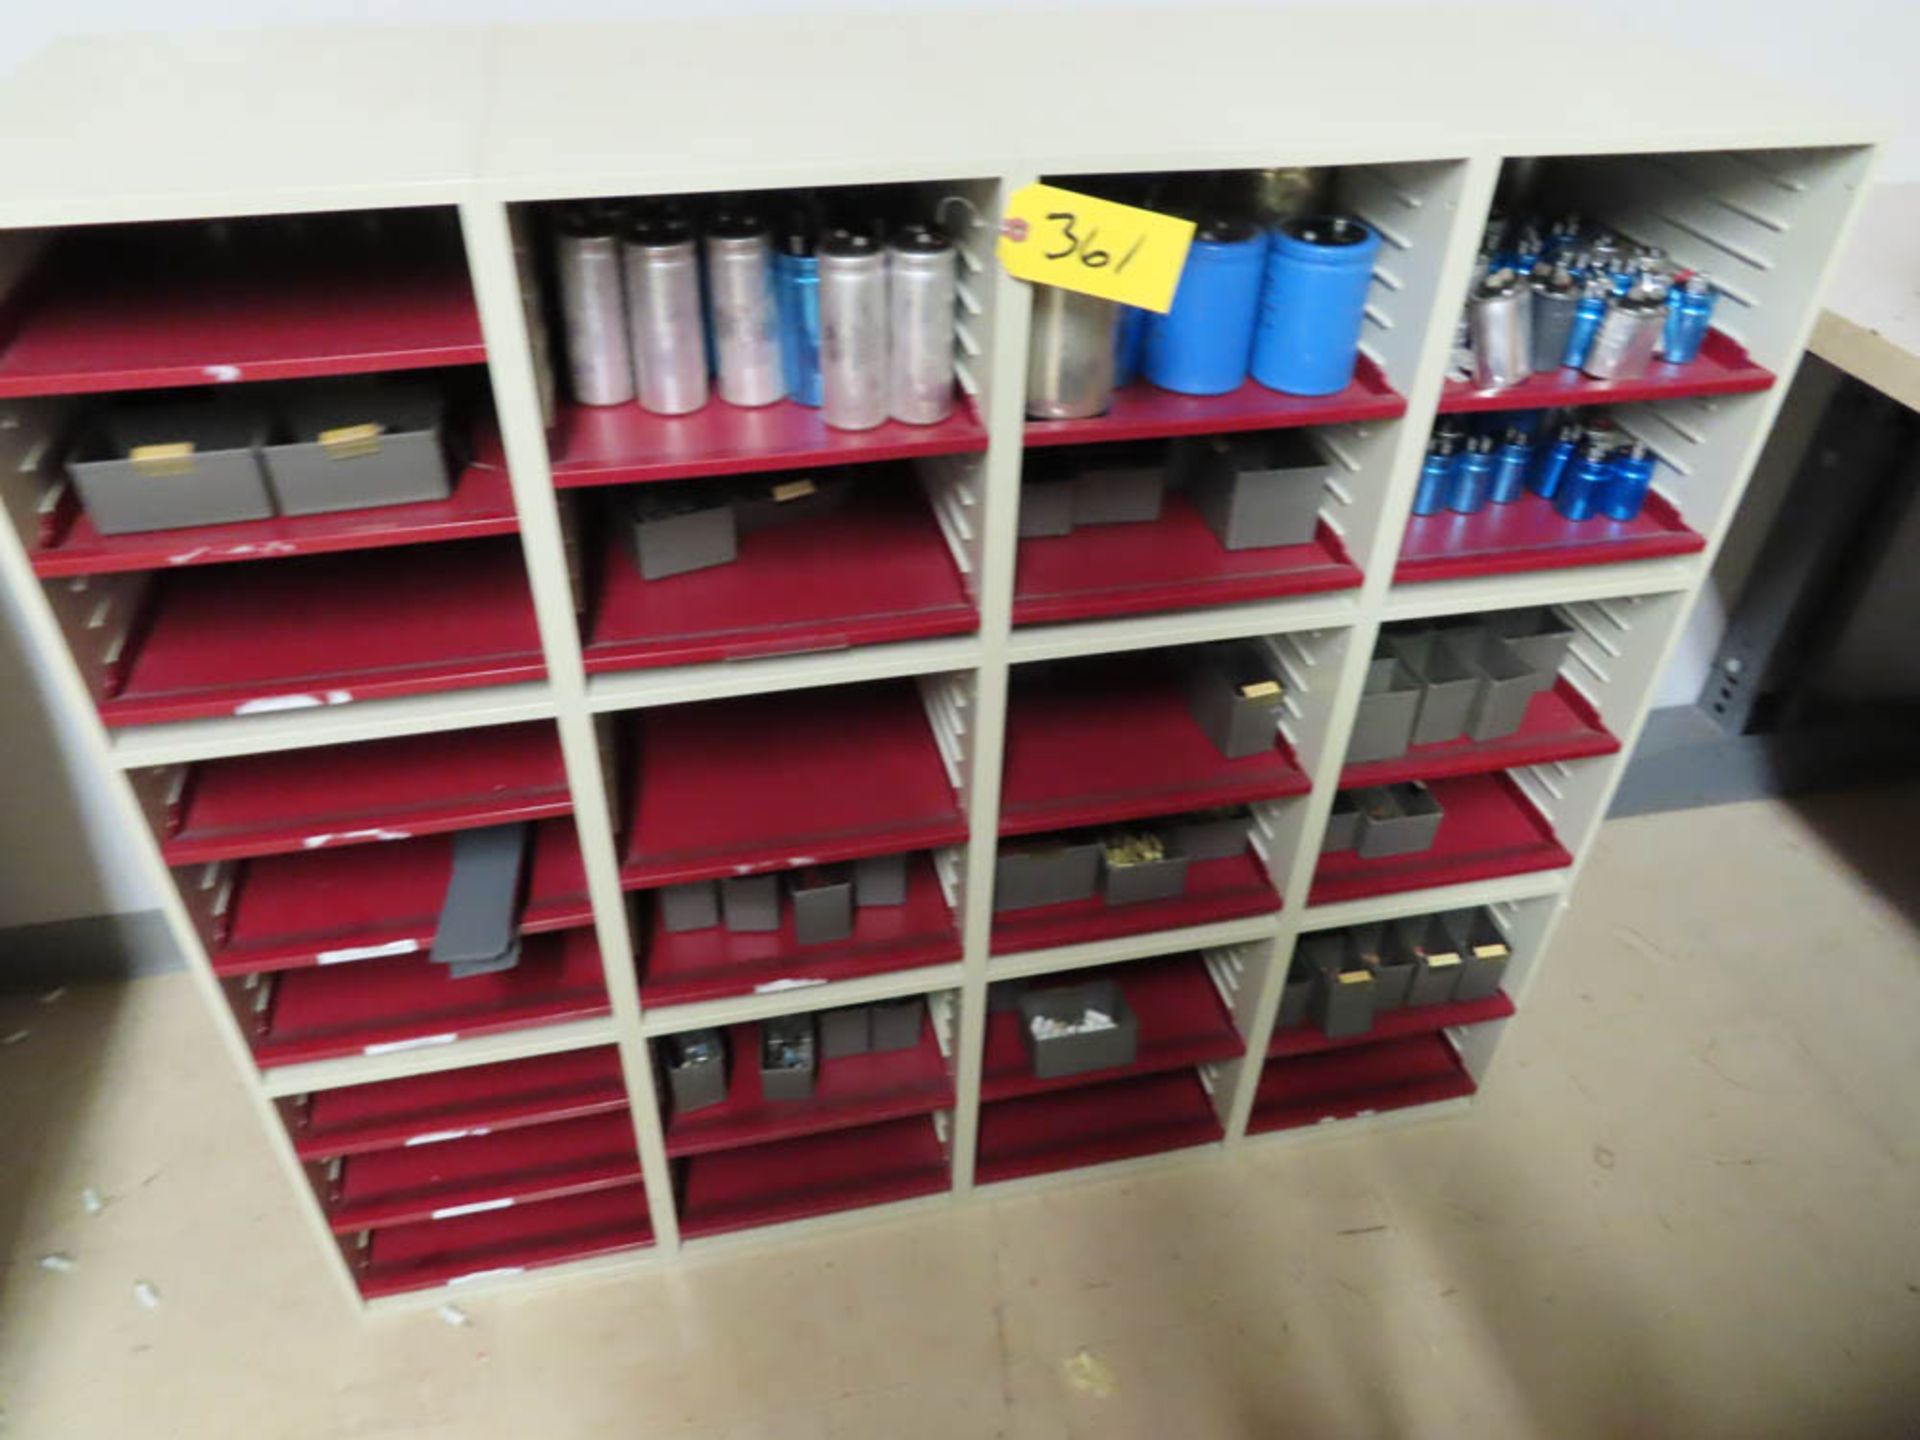 SHELF WITH HIGH VOLTAGE CAPACITORS